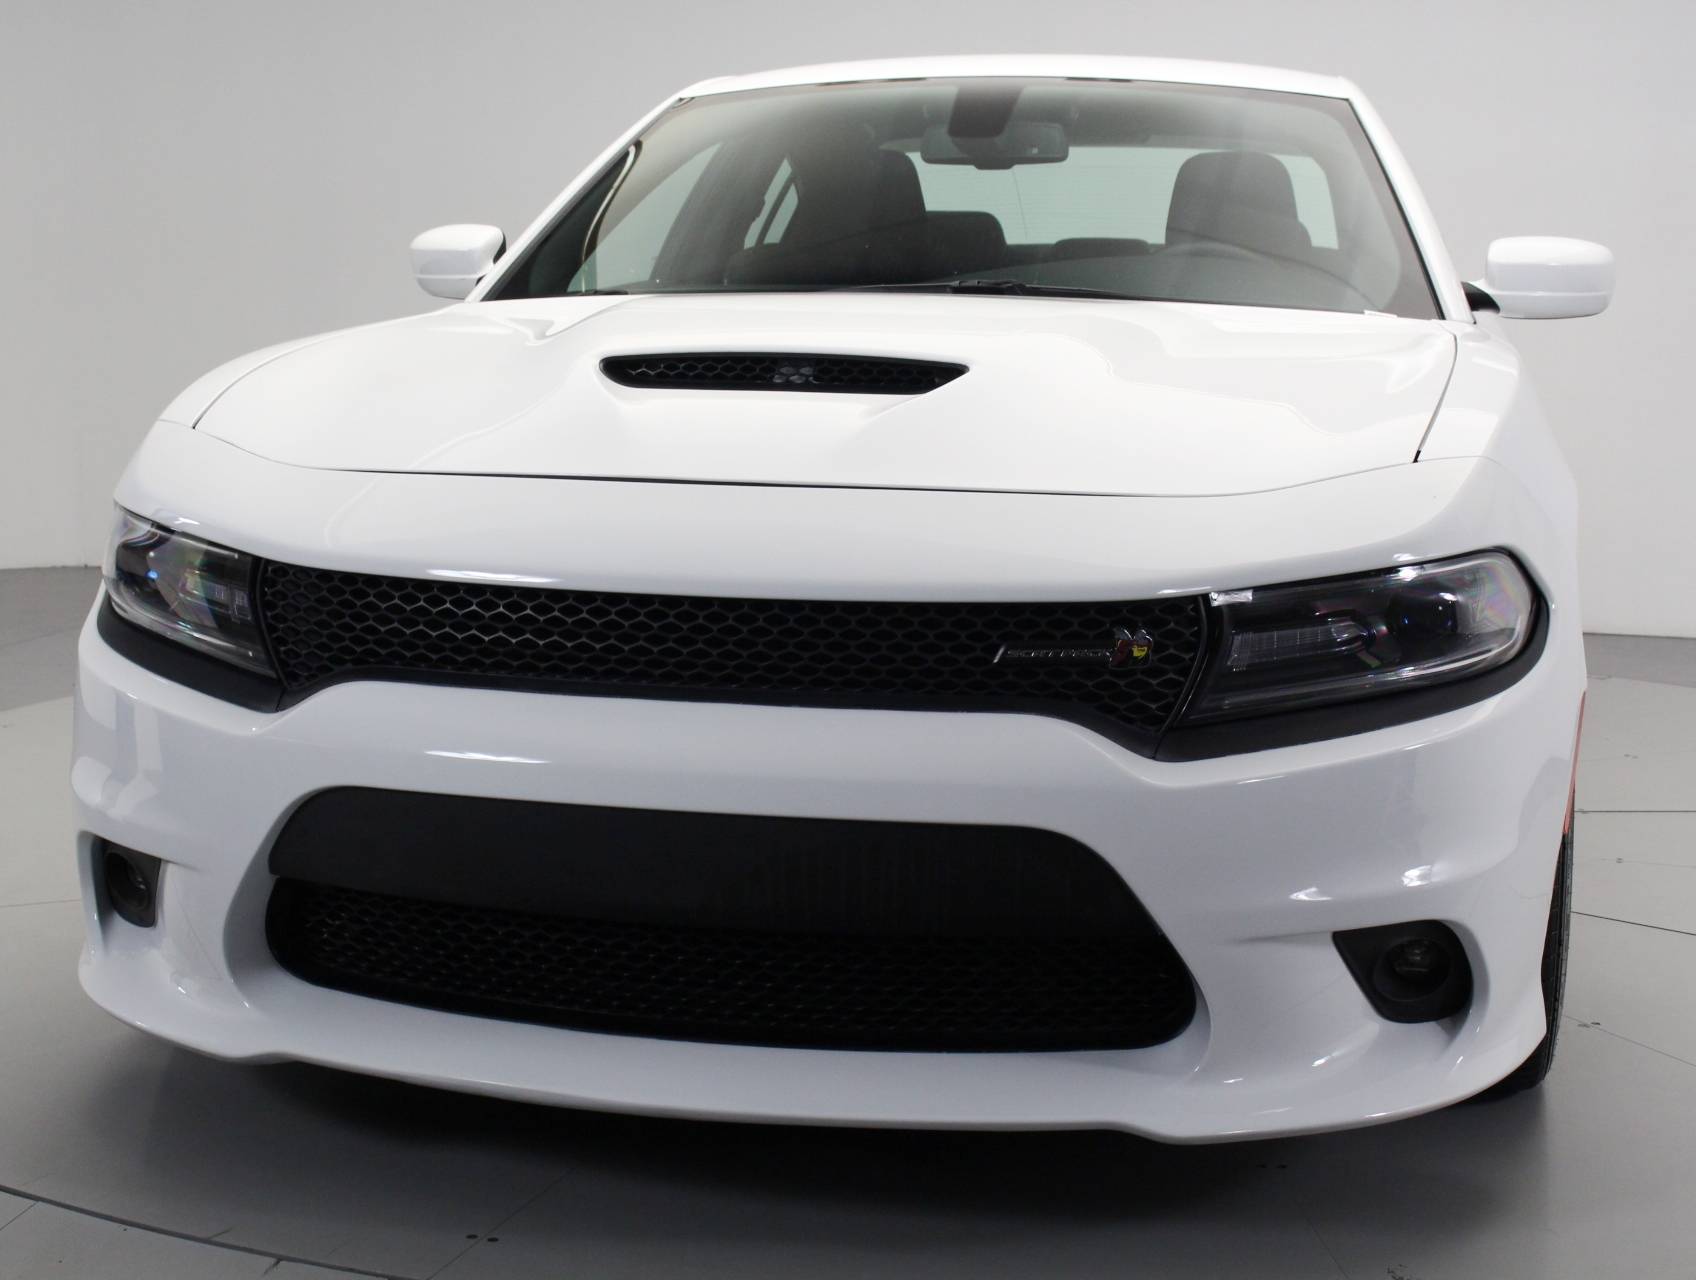 Florida Fine Cars - Used DODGE CHARGER 2018 MIAMI Srt 392 Scat Pack